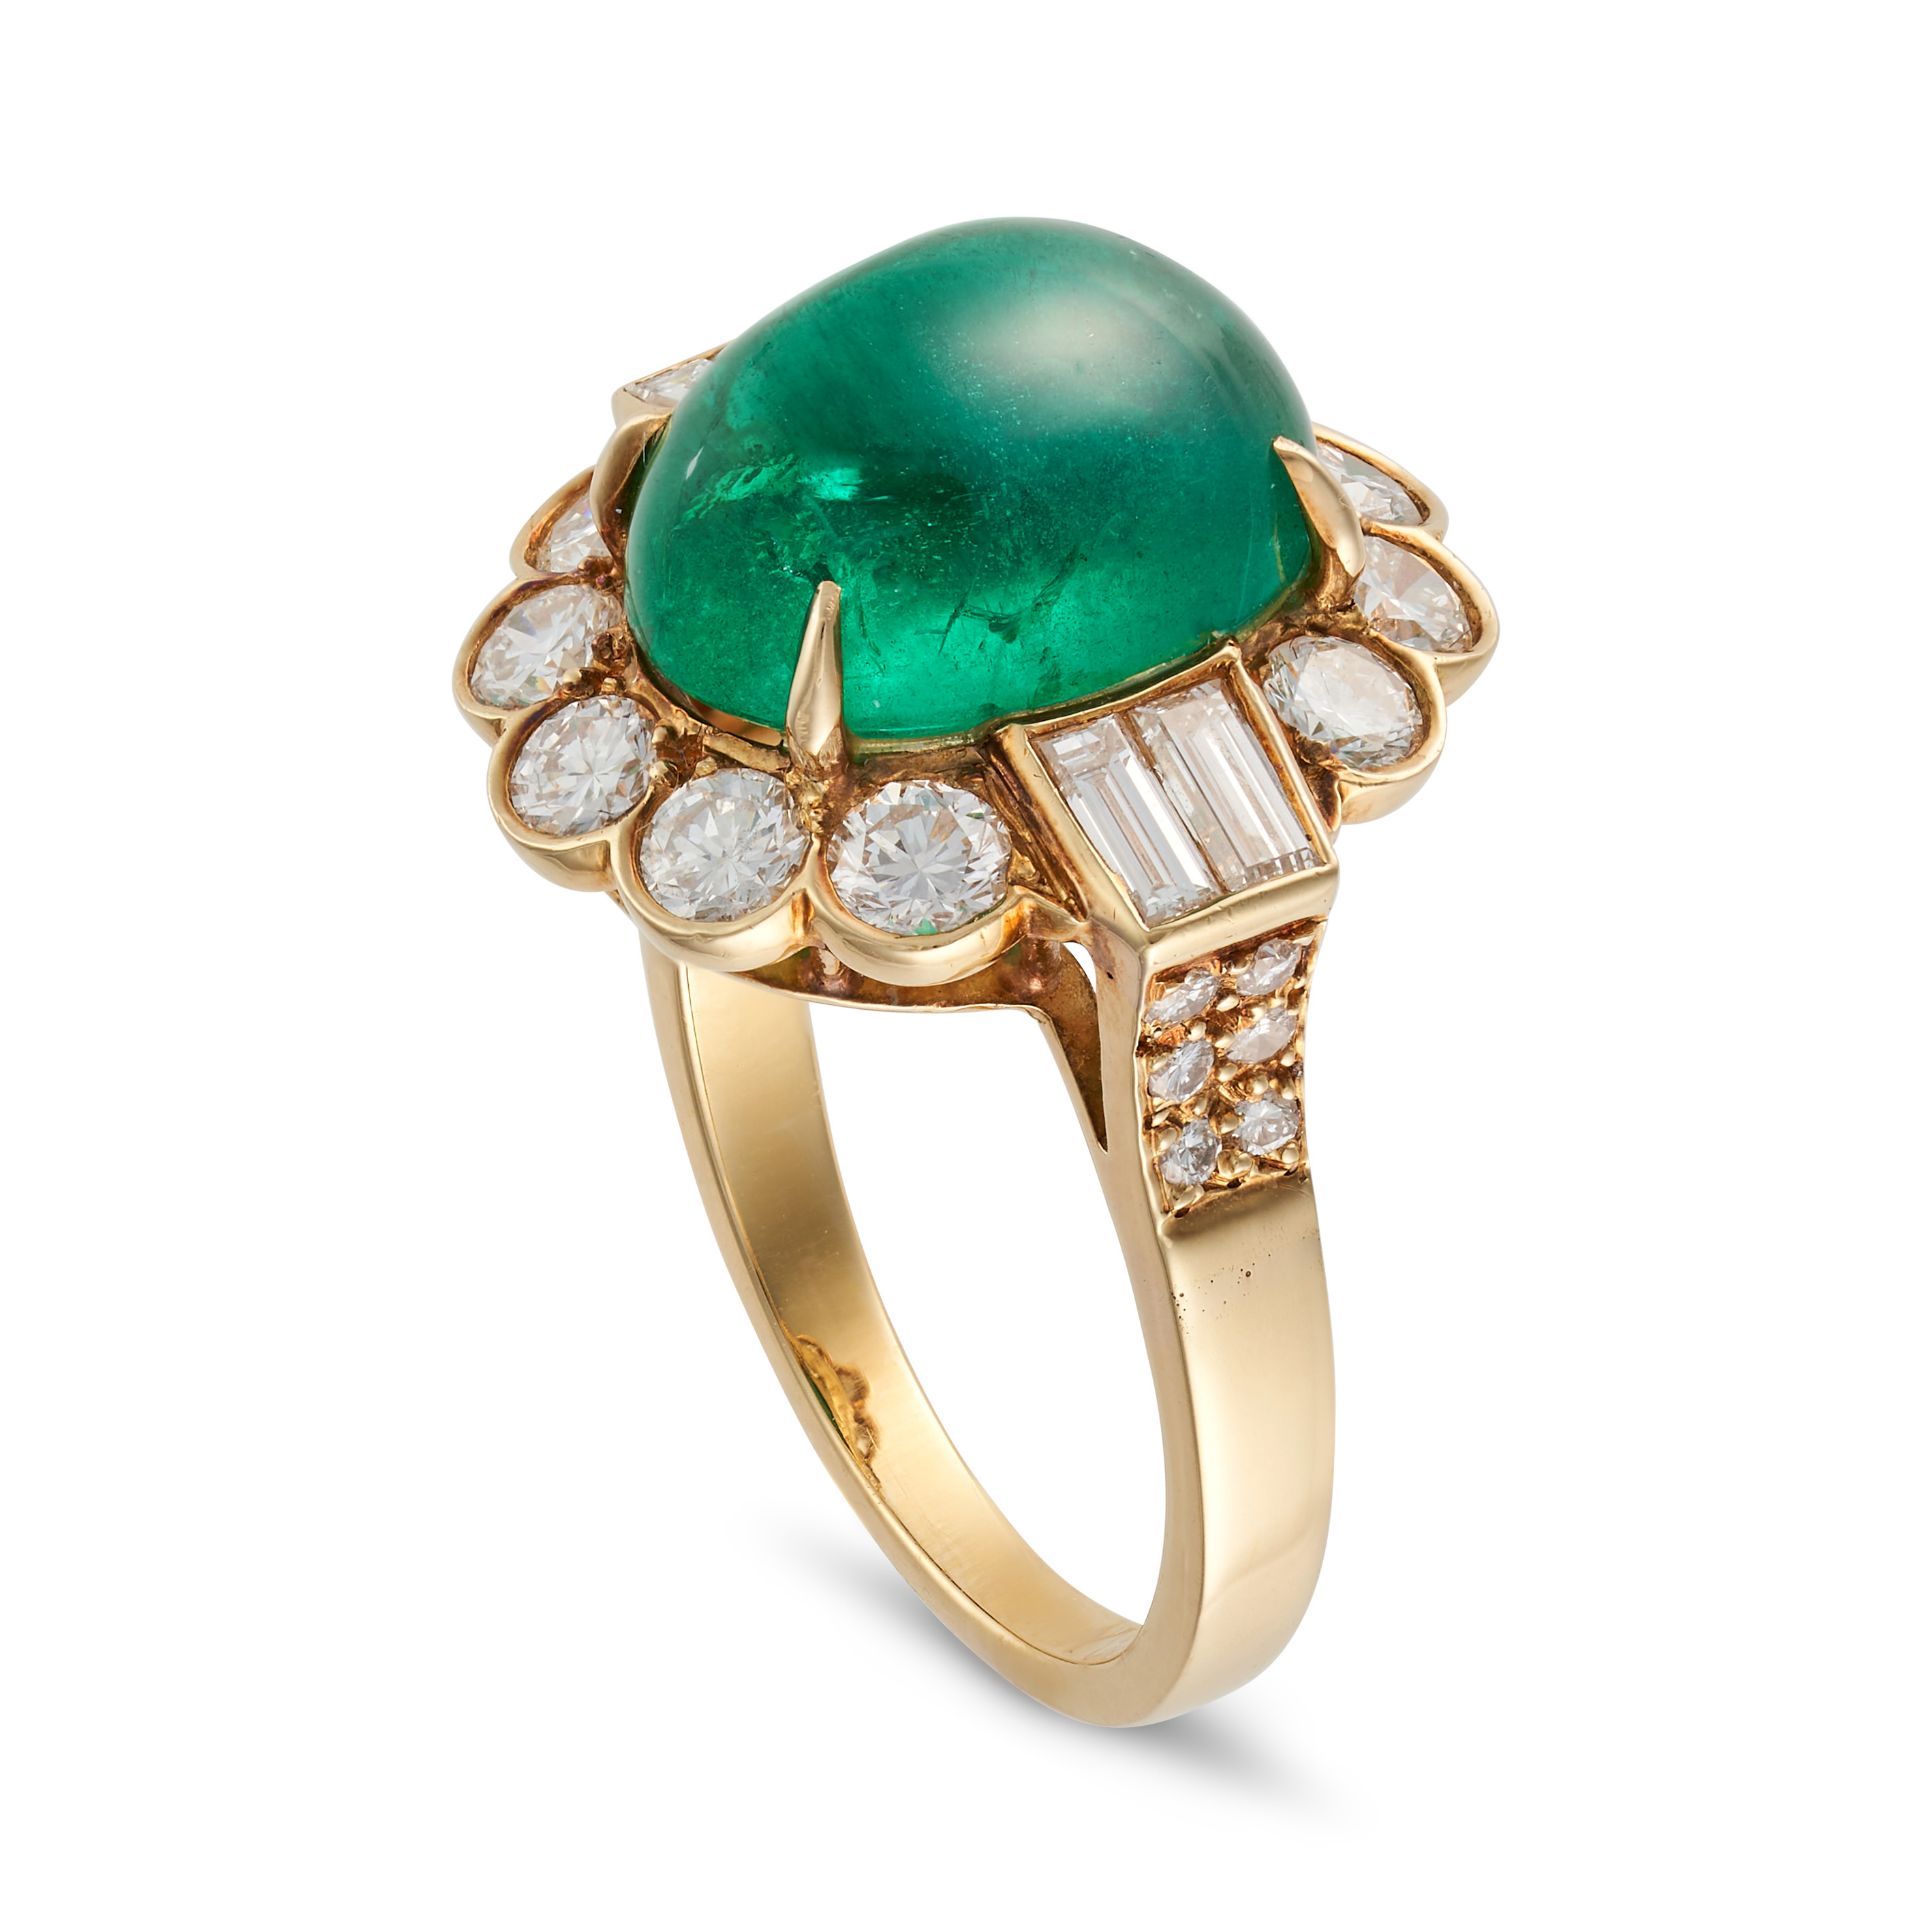 VAN CLEEF & ARPELS, AN EMERALD AND DIAMOND RING in 18ct yellow gold, set with an oval cabochon em... - Image 2 of 2